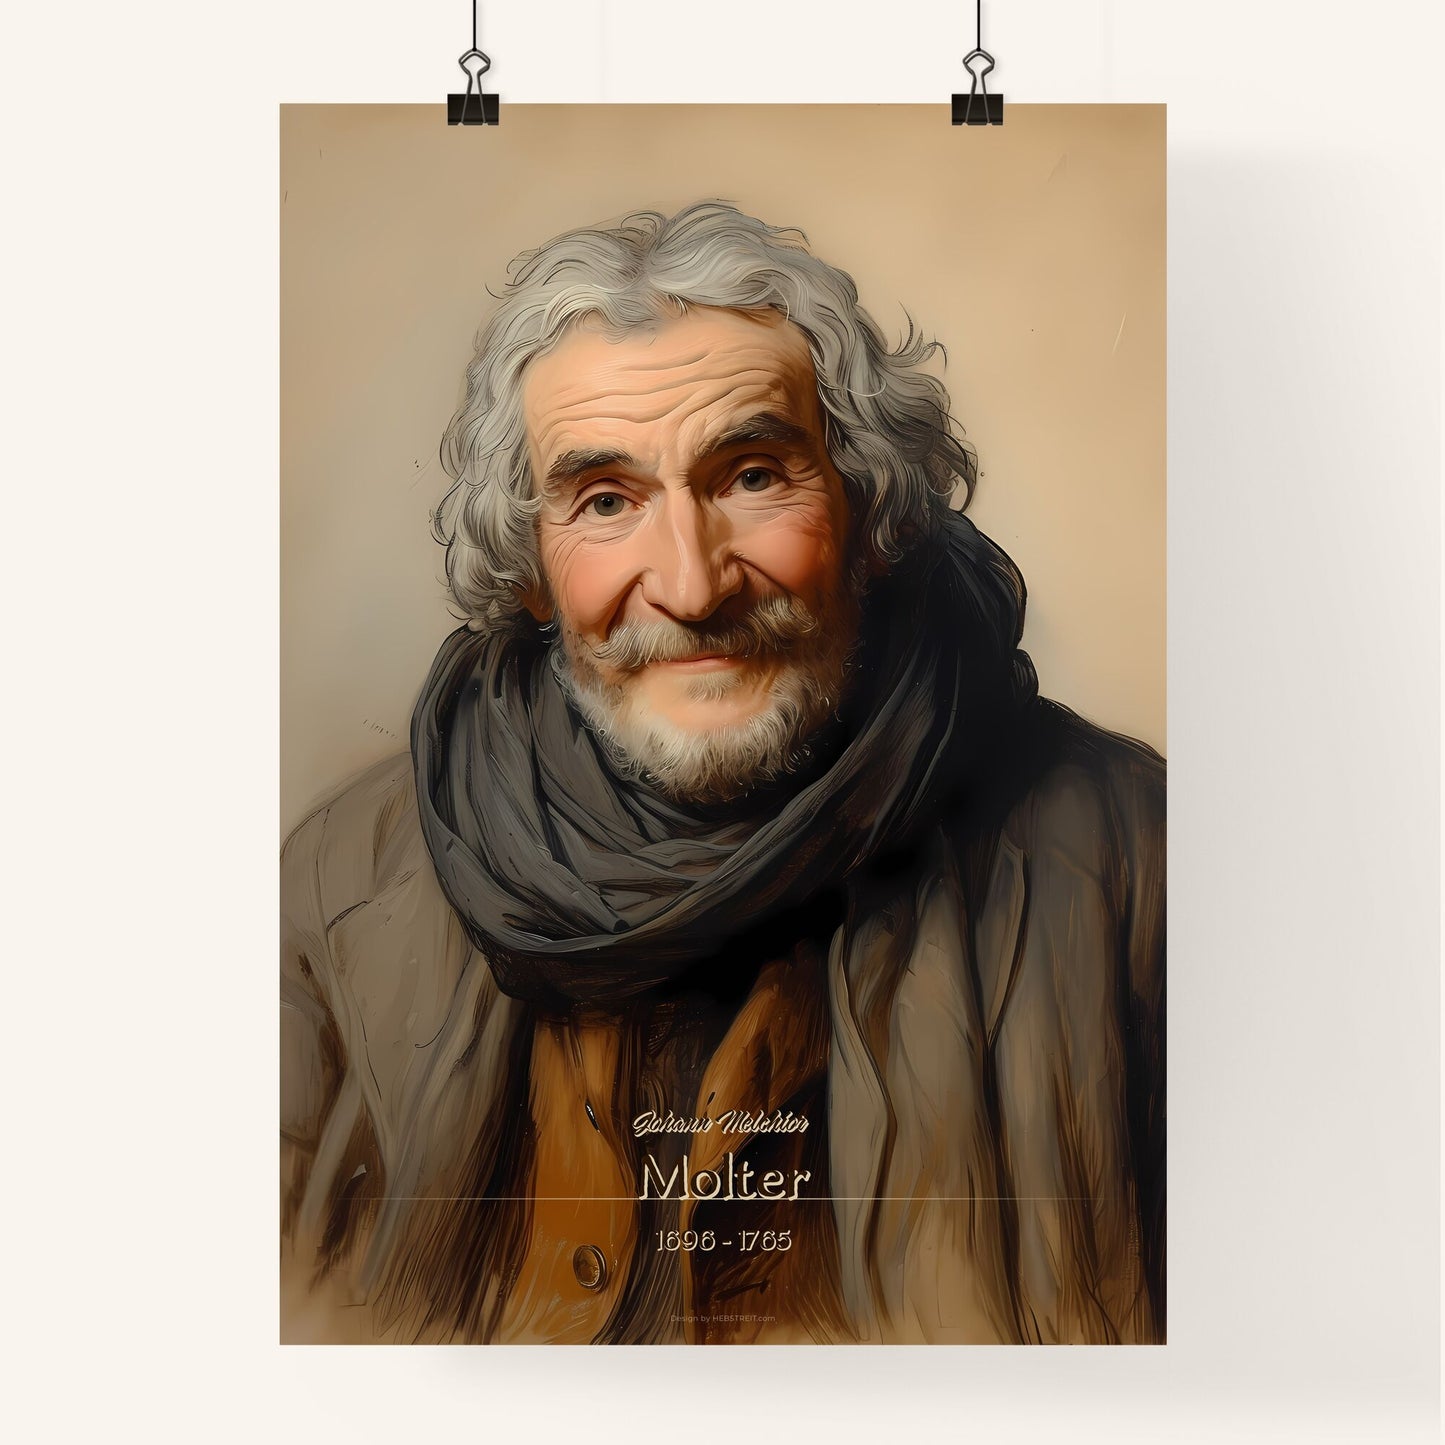 Johann Melchior, Molter, 1696 - 1765, A Poster of a man with a beard and a scarf Default Title